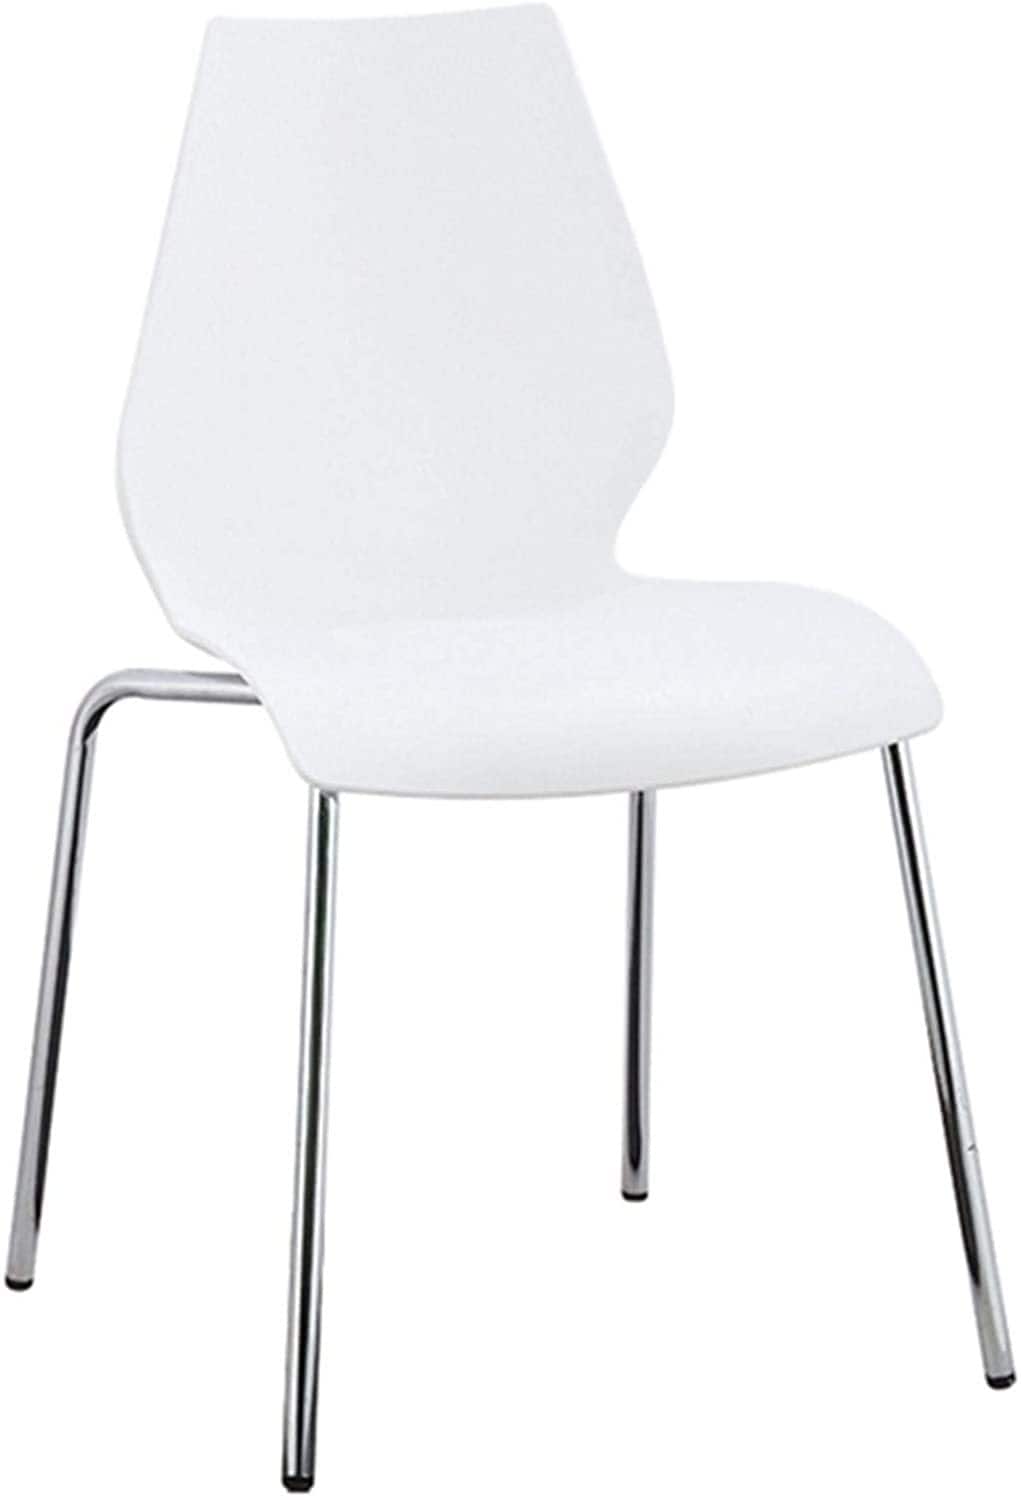 buy lanny plastic stackable chair 036a white metal leg outdoorindoor  outsideinside watersun proof fast food steel party restaurant kitchen  events